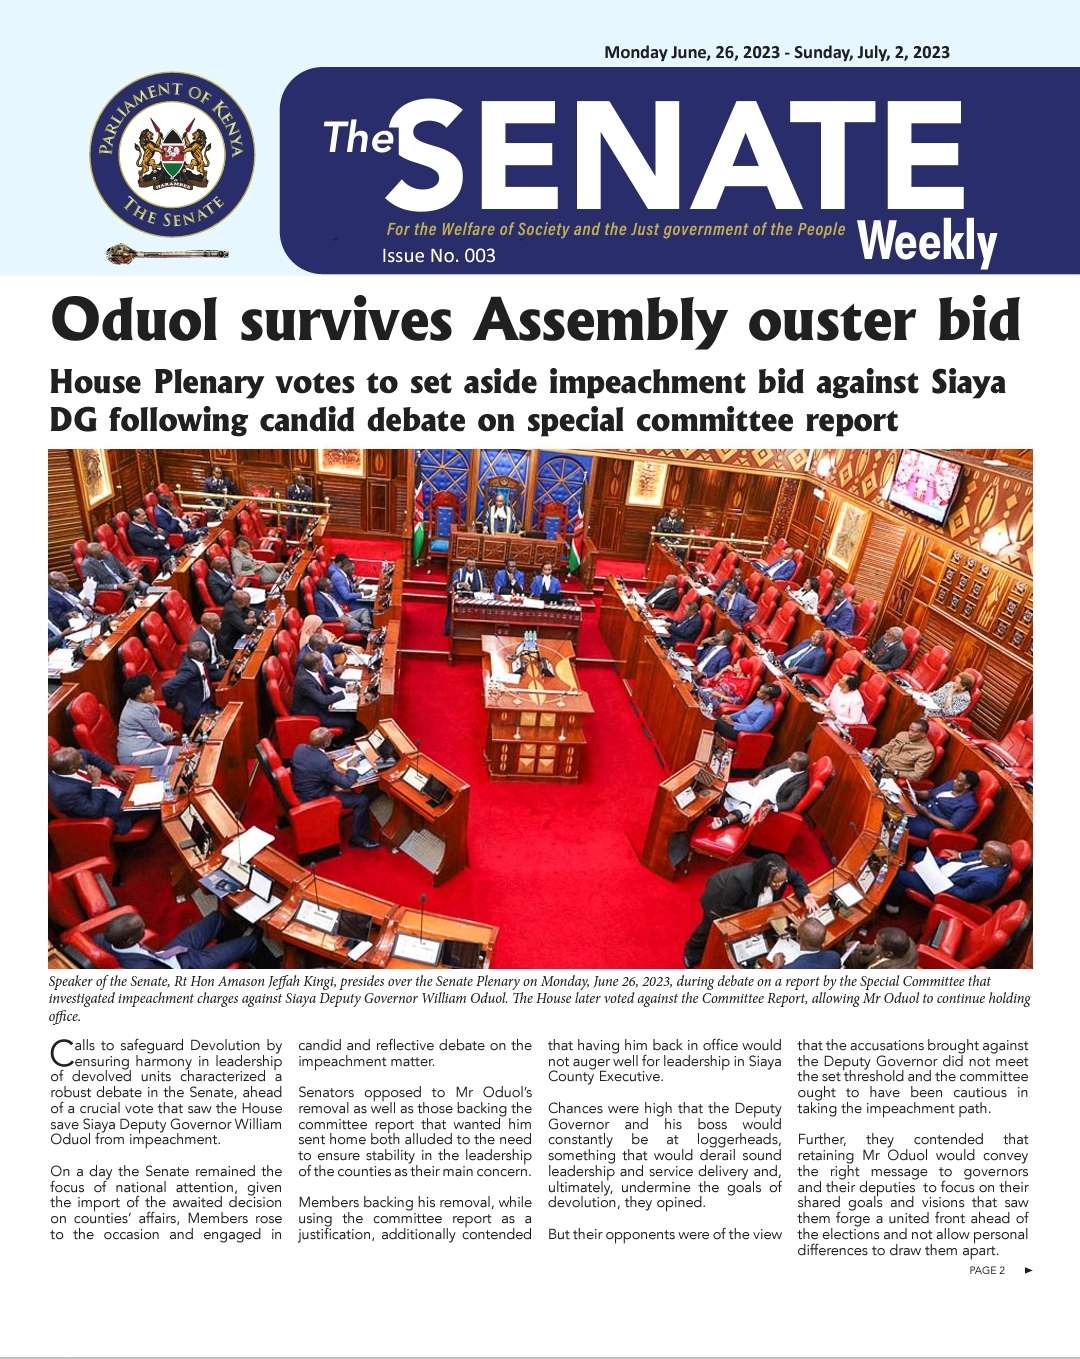 THE SENATE WEEKLY: Issue No.003